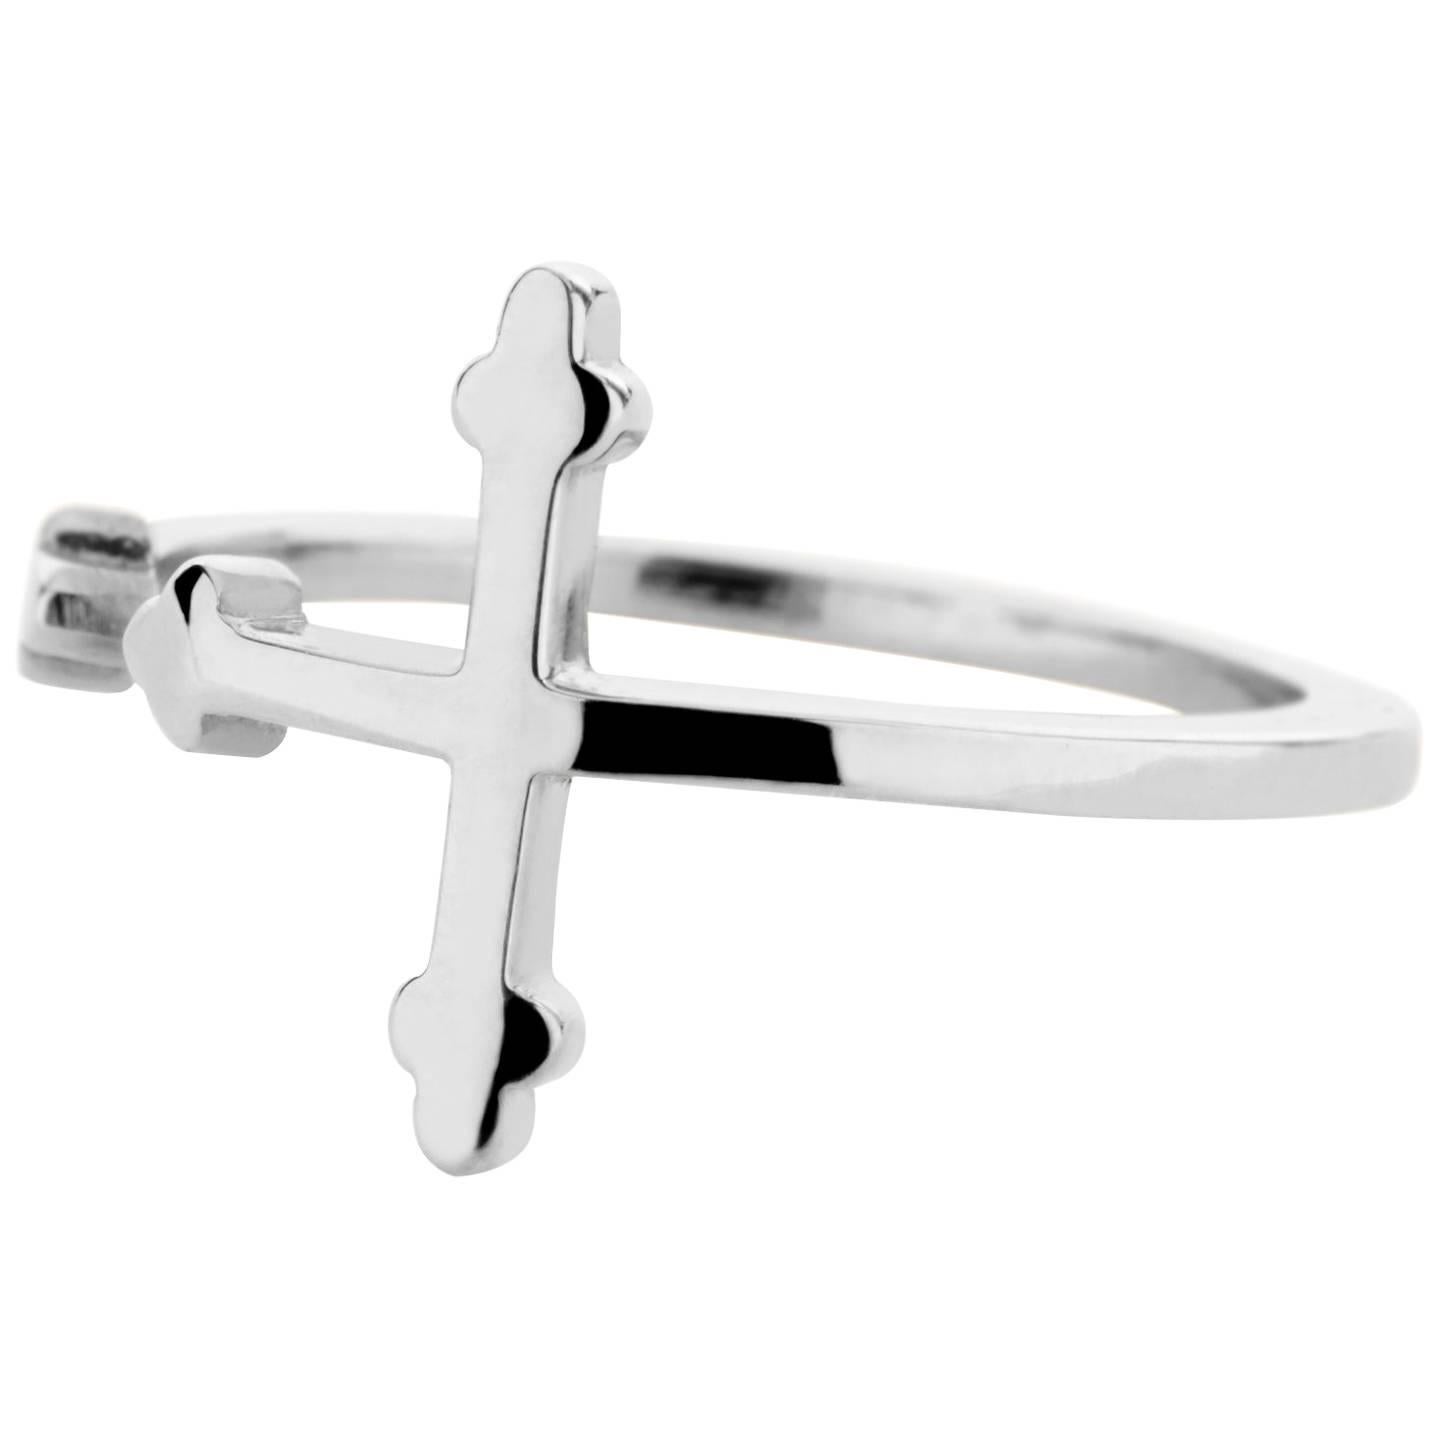 Sterling Silver Solid Cross Your Fingers Ring